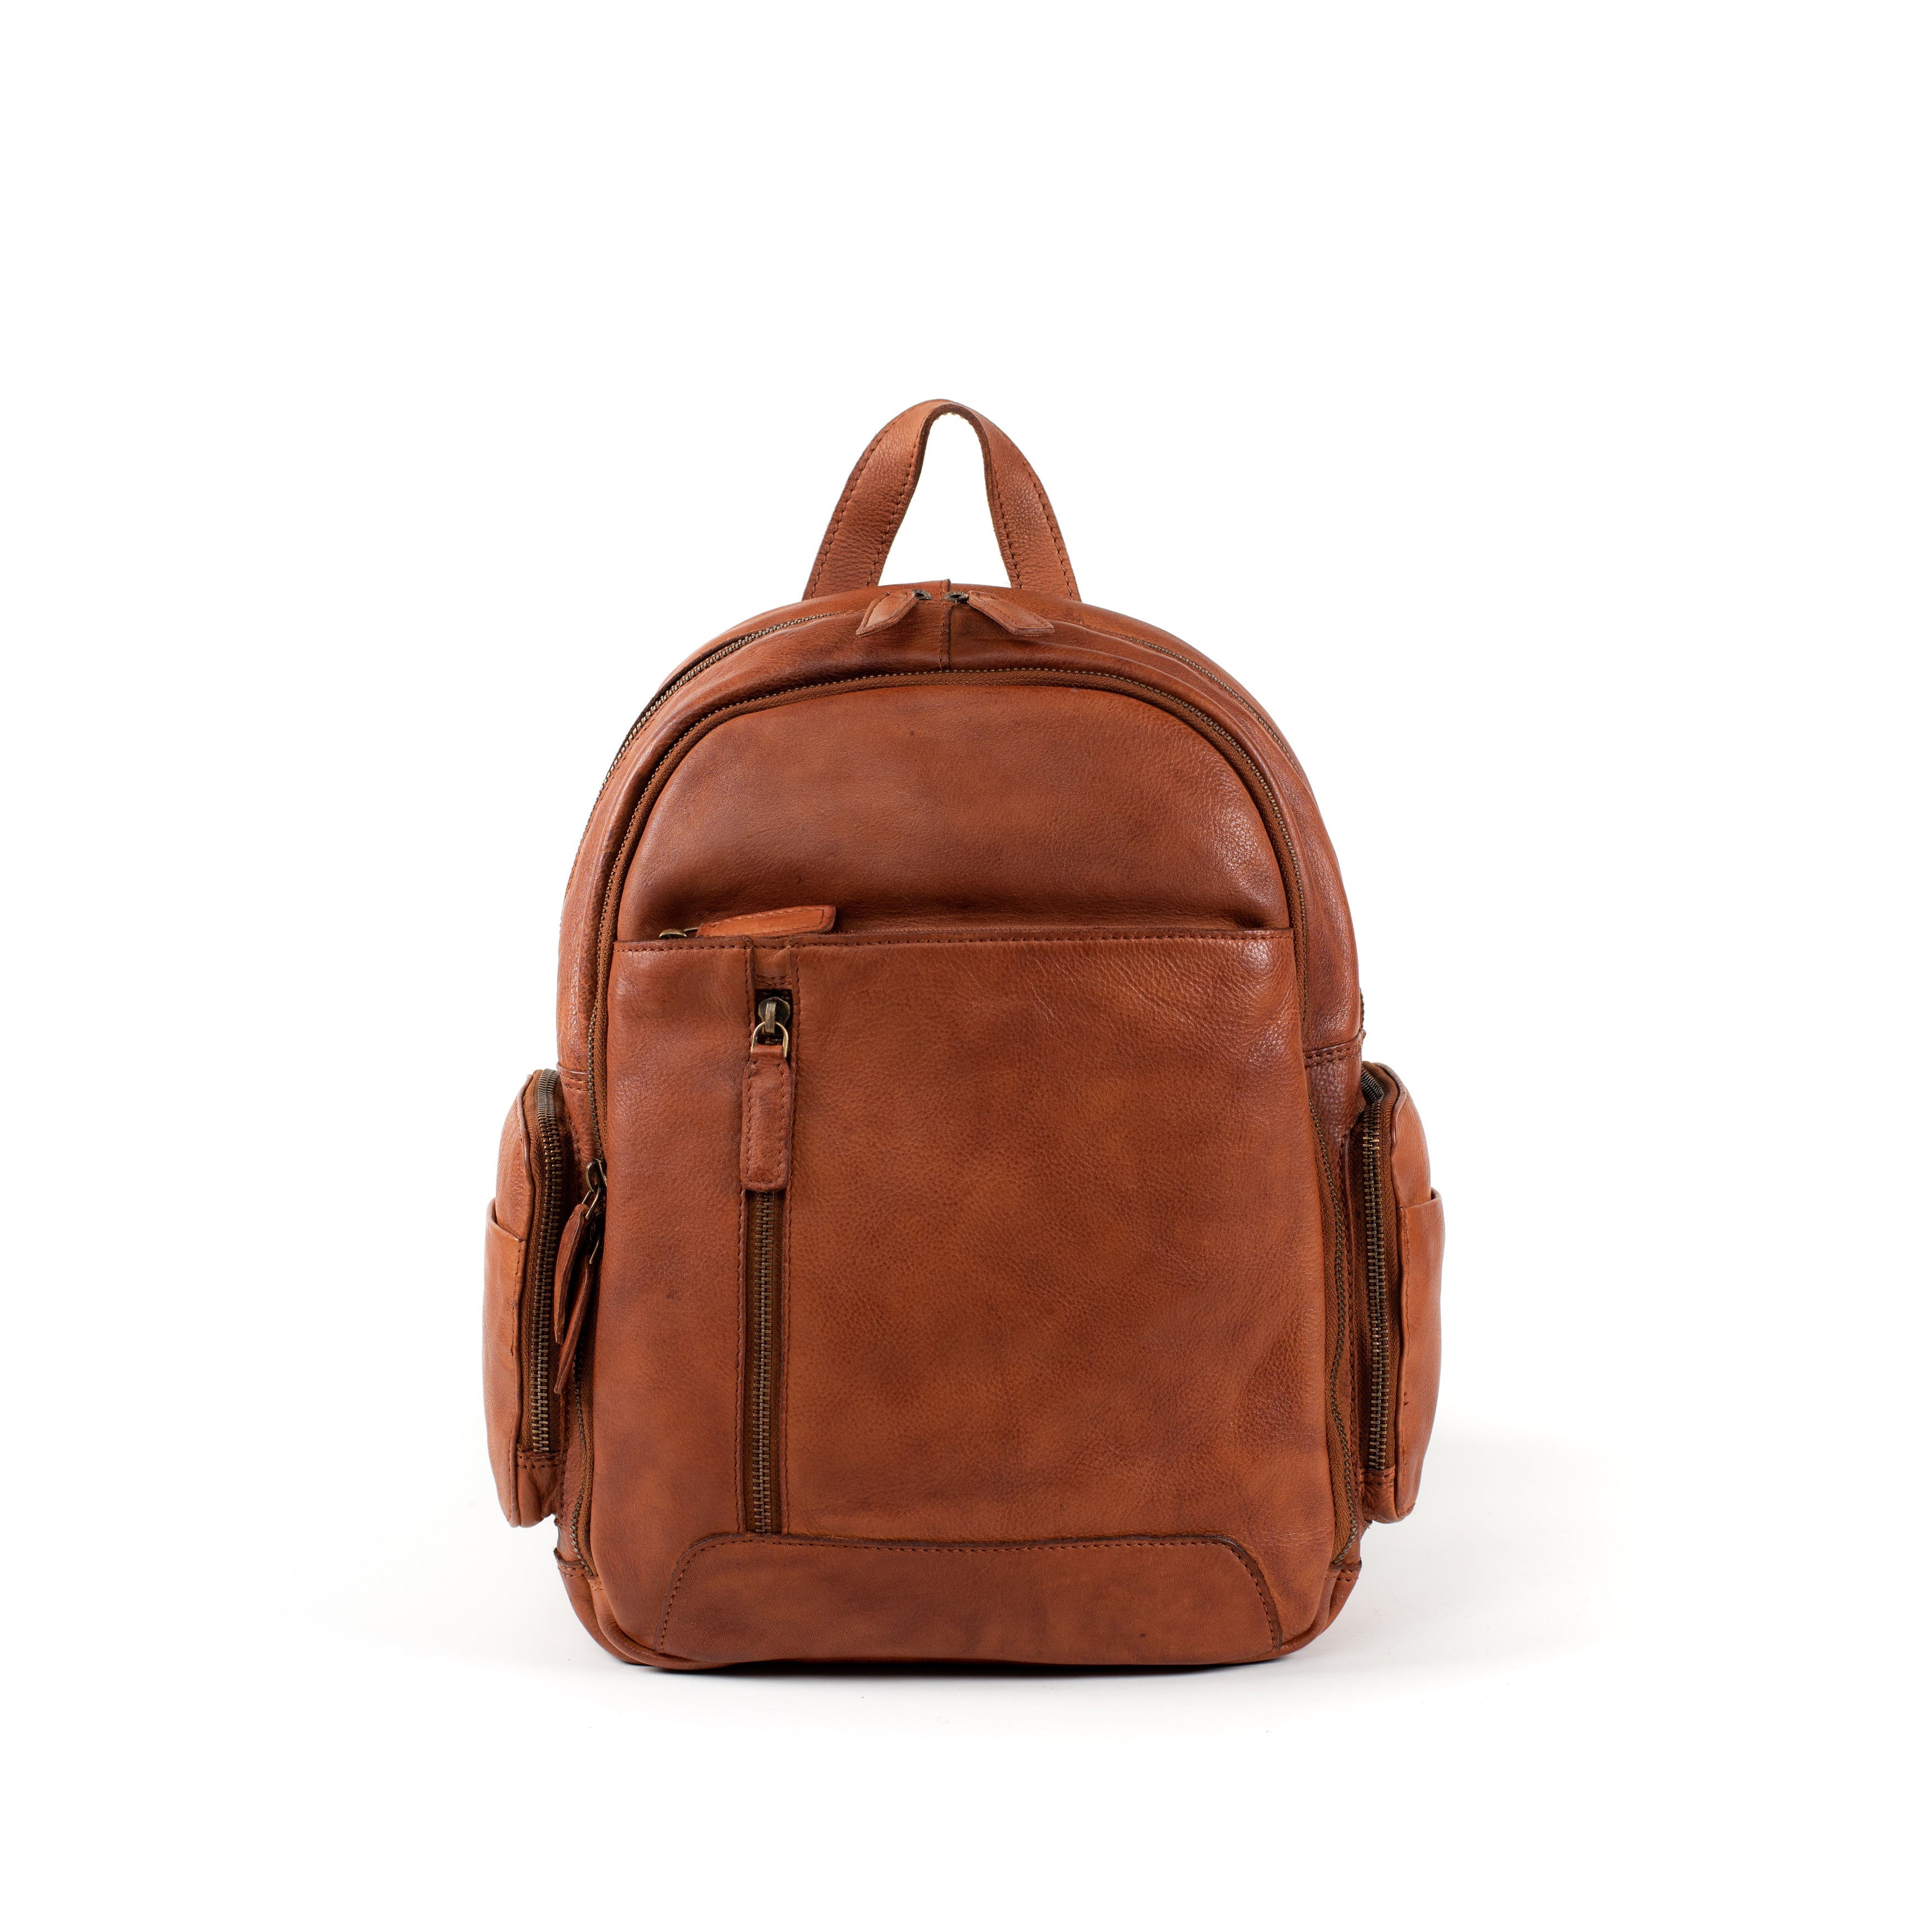 Gianni Conti DESMOND Vegetable-Tanned Leather Bag